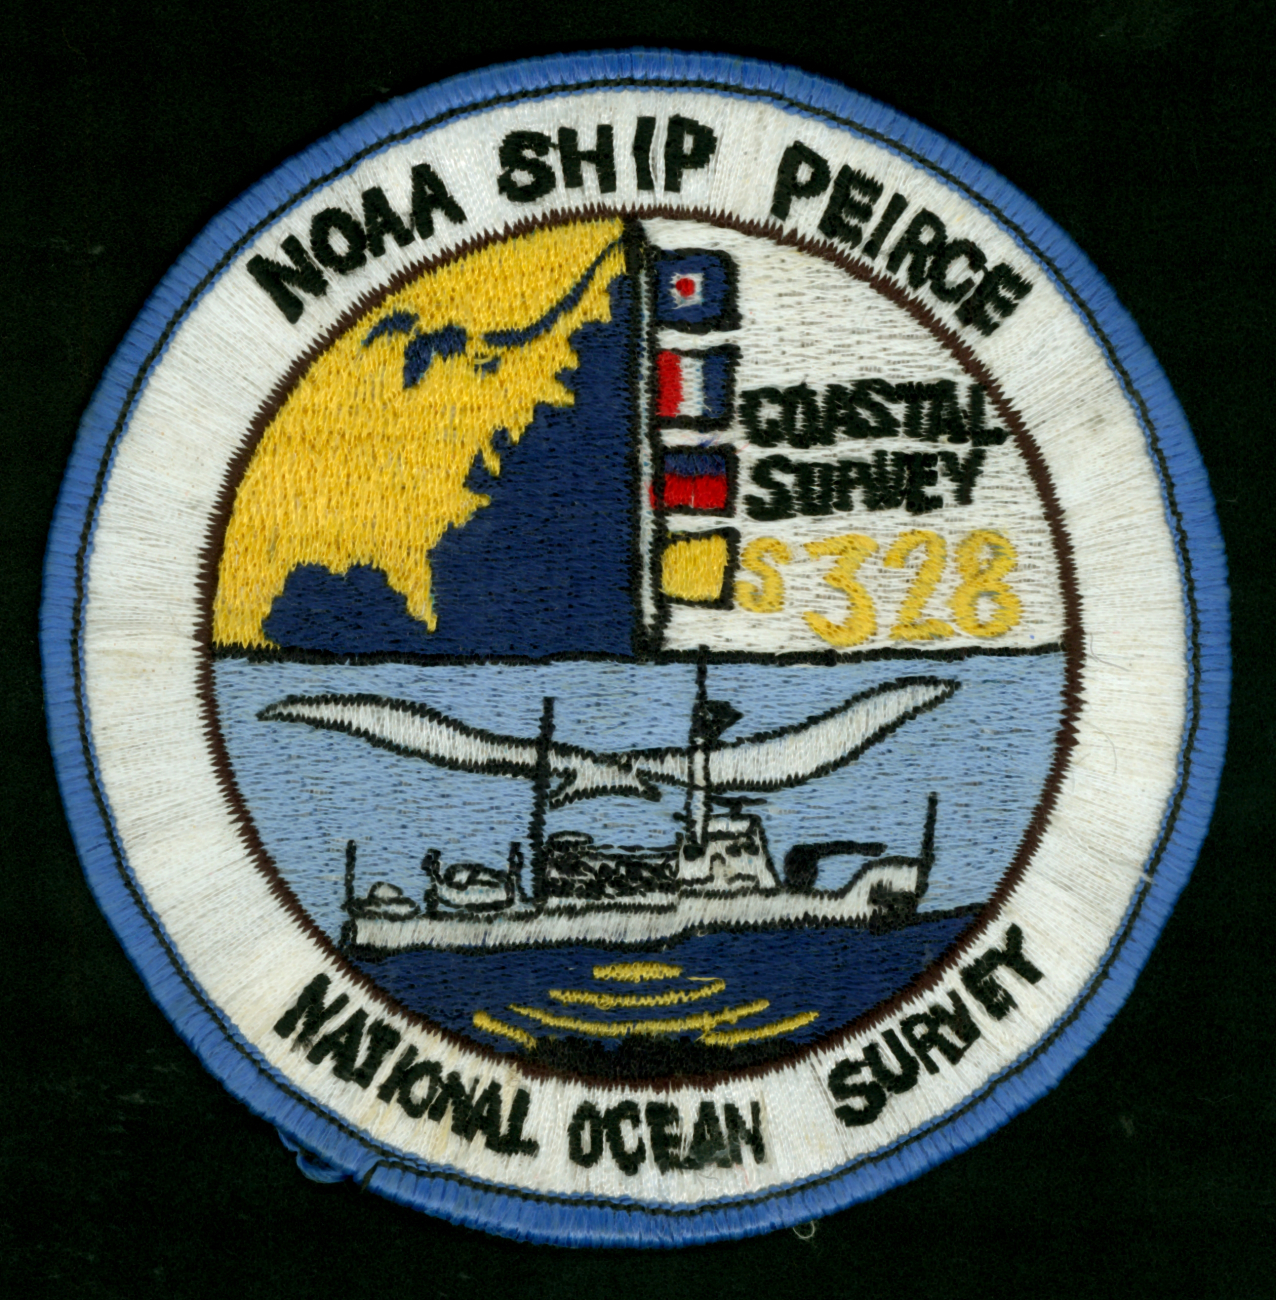 Patch commemorating NOAA Ship PEIRCE, in service 1962-1985